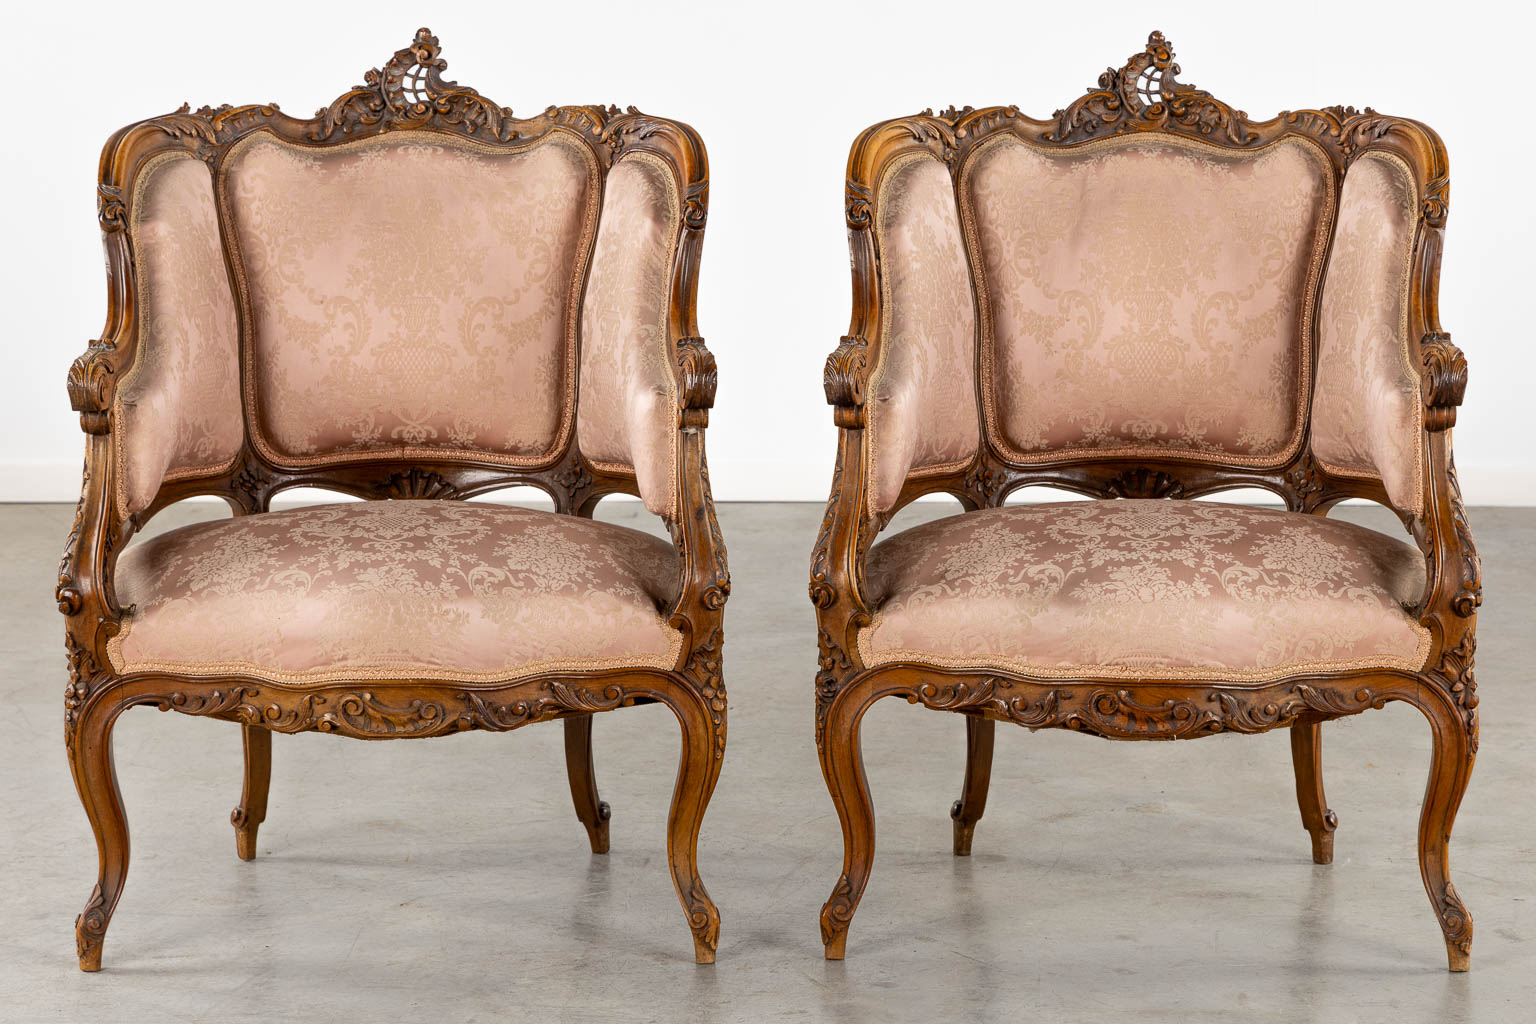 An 8-piece salon suite, sculptured wood in Louis XV style. Circa 1900. (L:67 x W:135 x H:103 cm) - Image 18 of 33